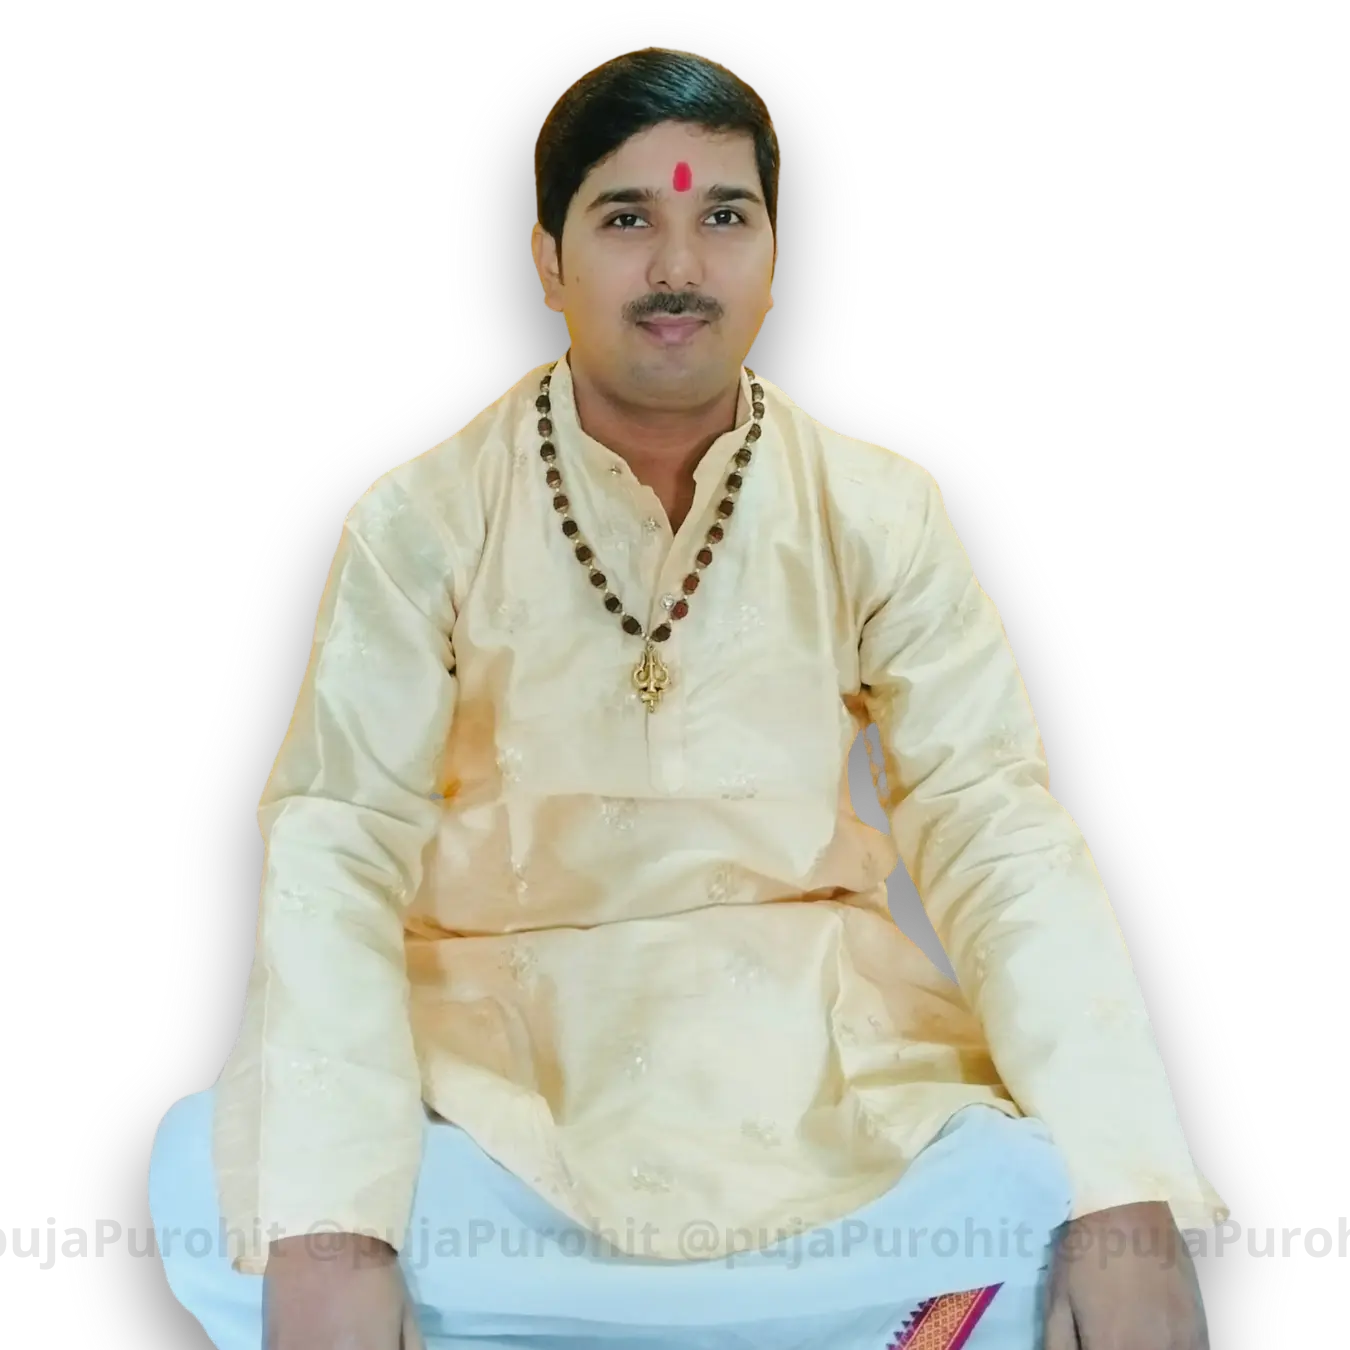 Meet Pandit Pawan Pandey having 20 years of experience serving as a north Indian pandit in Banglore, among all Kannada, Tamil, and Telugu pandits in Banglore. he served 350+ puja with 100% people satisfaction